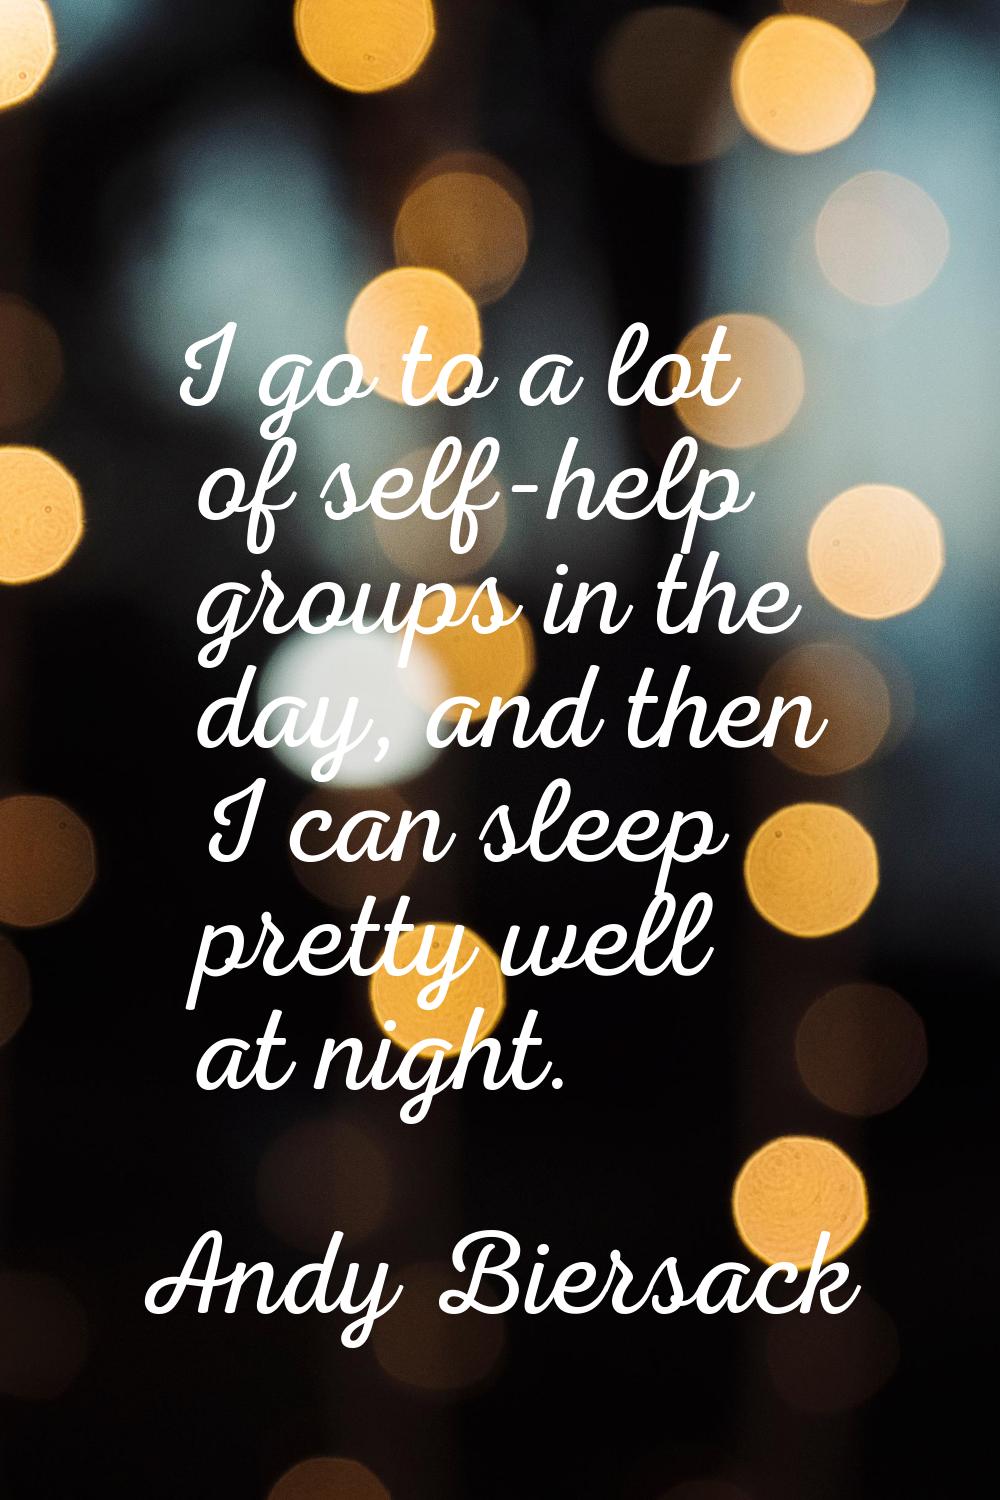 I go to a lot of self-help groups in the day, and then I can sleep pretty well at night.